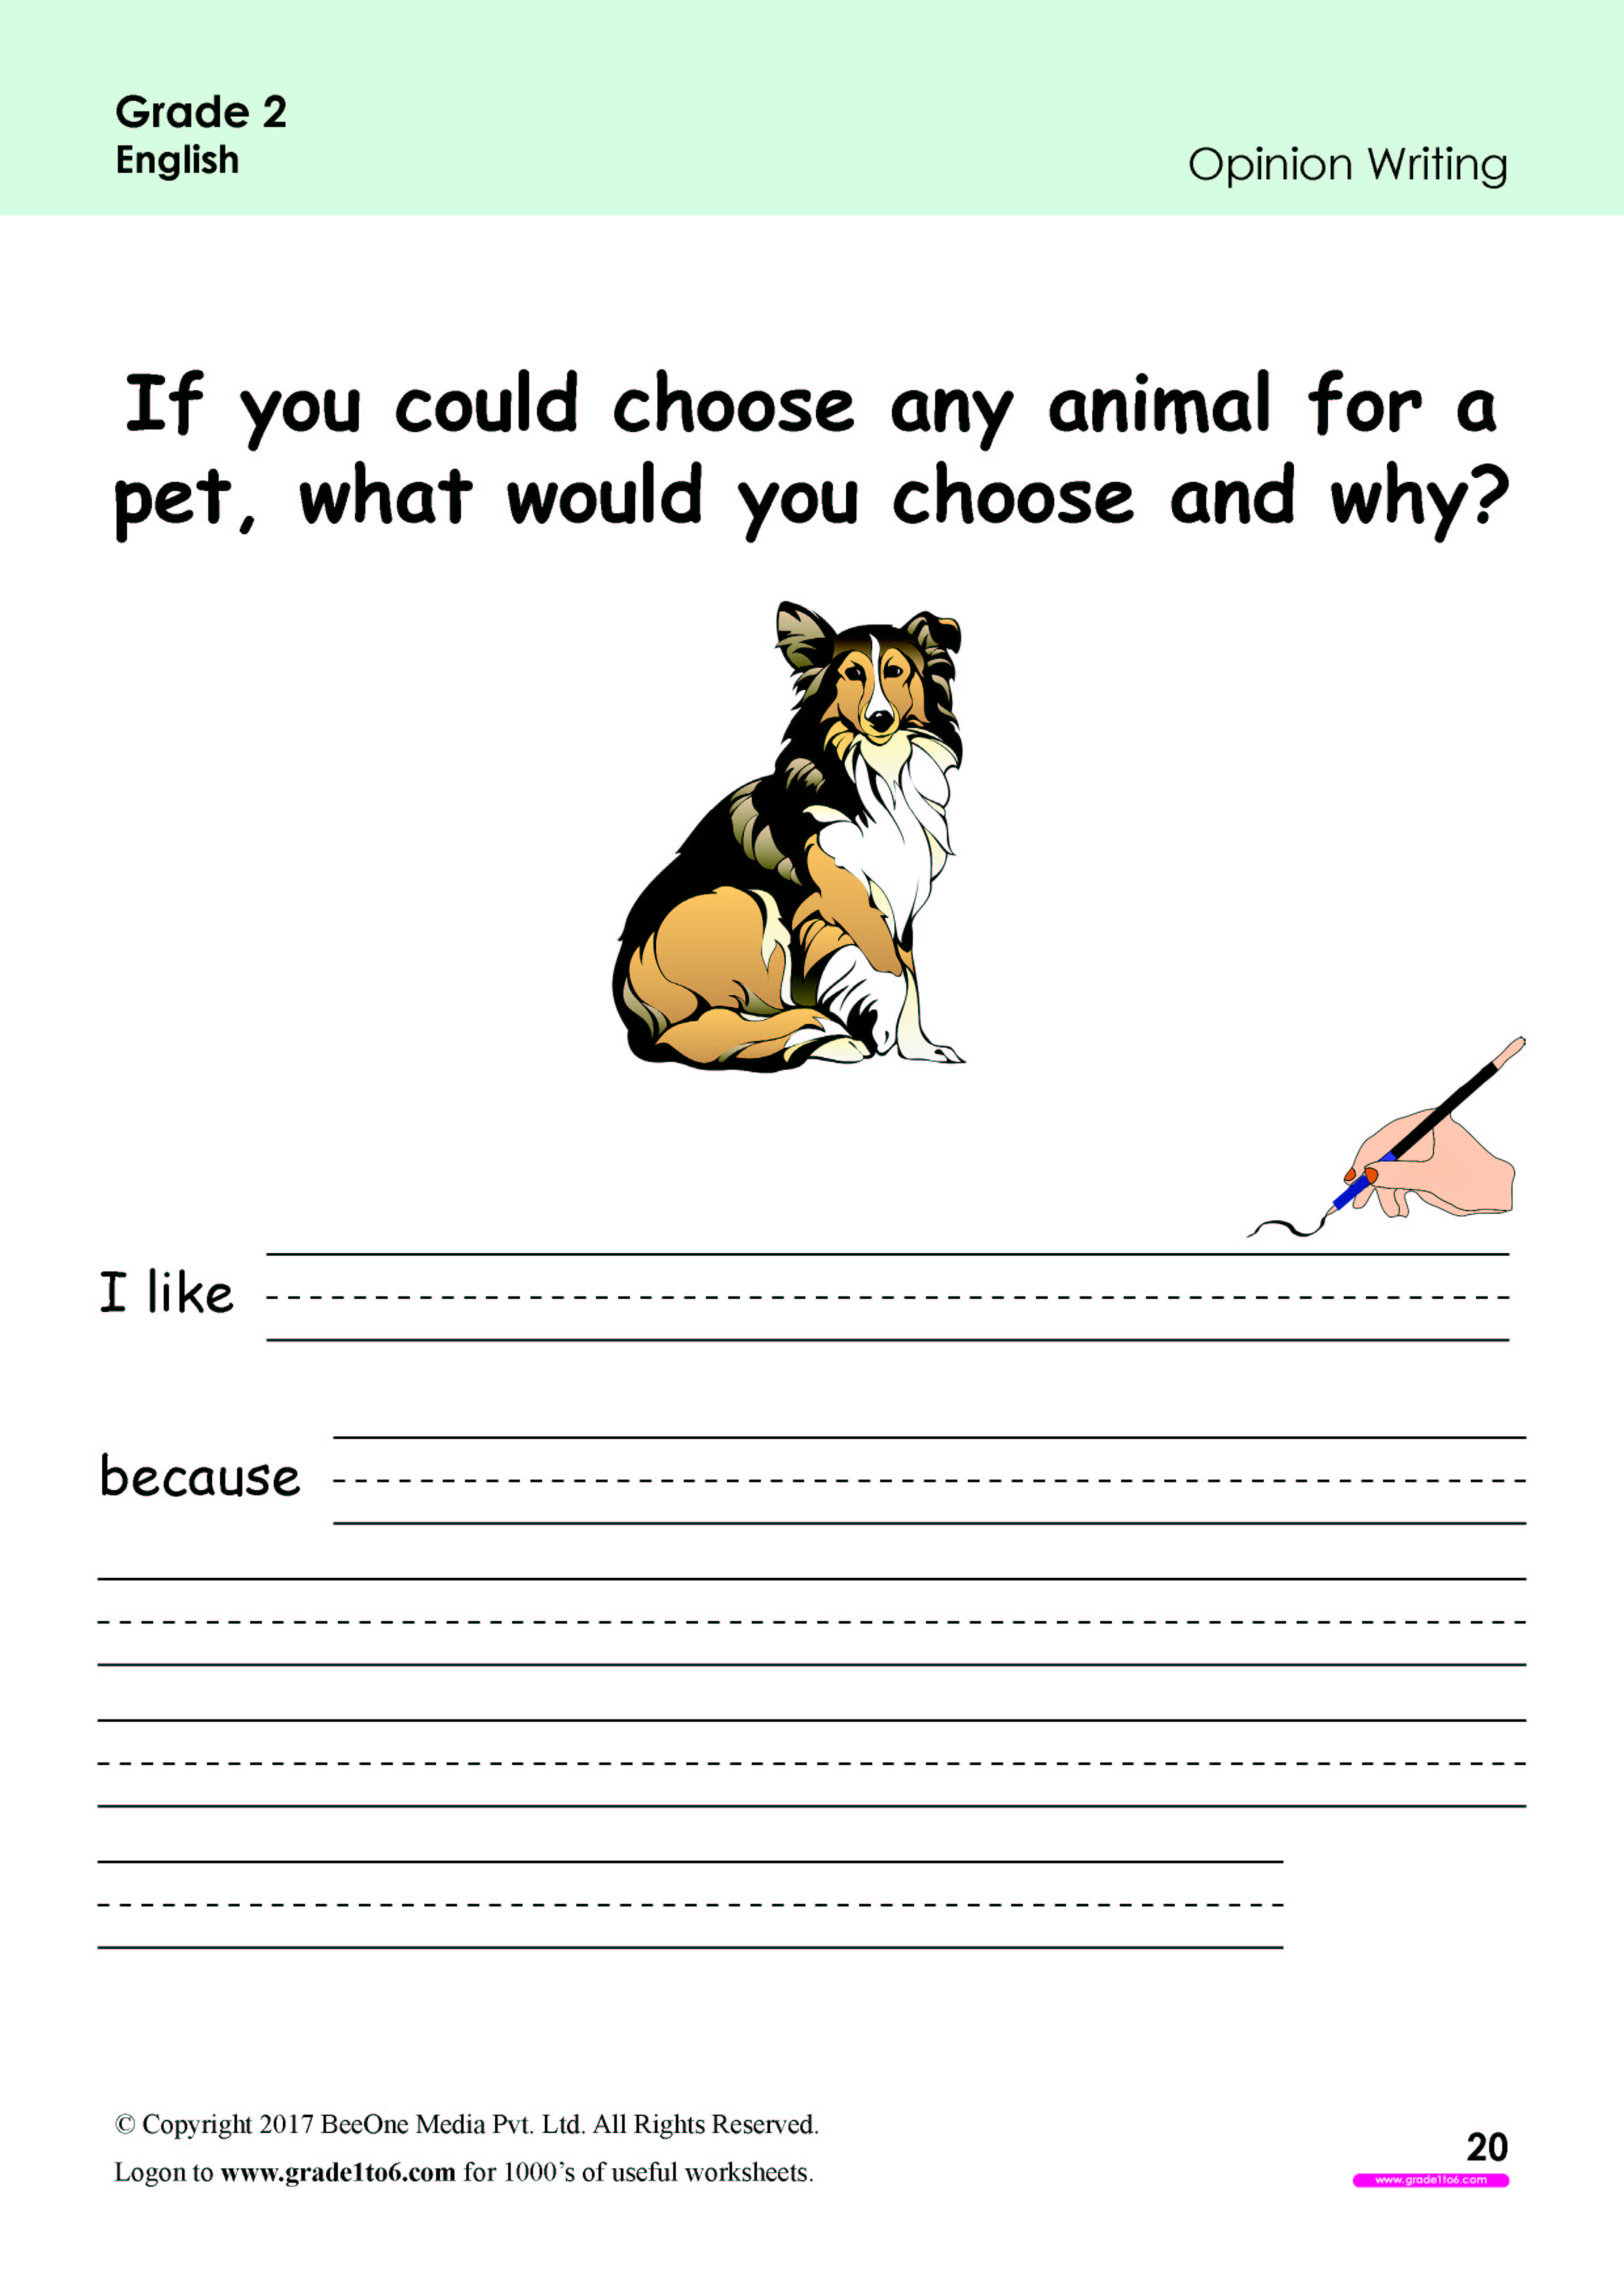 opinion writing worksheets for grade 2wwwgrade1to6com